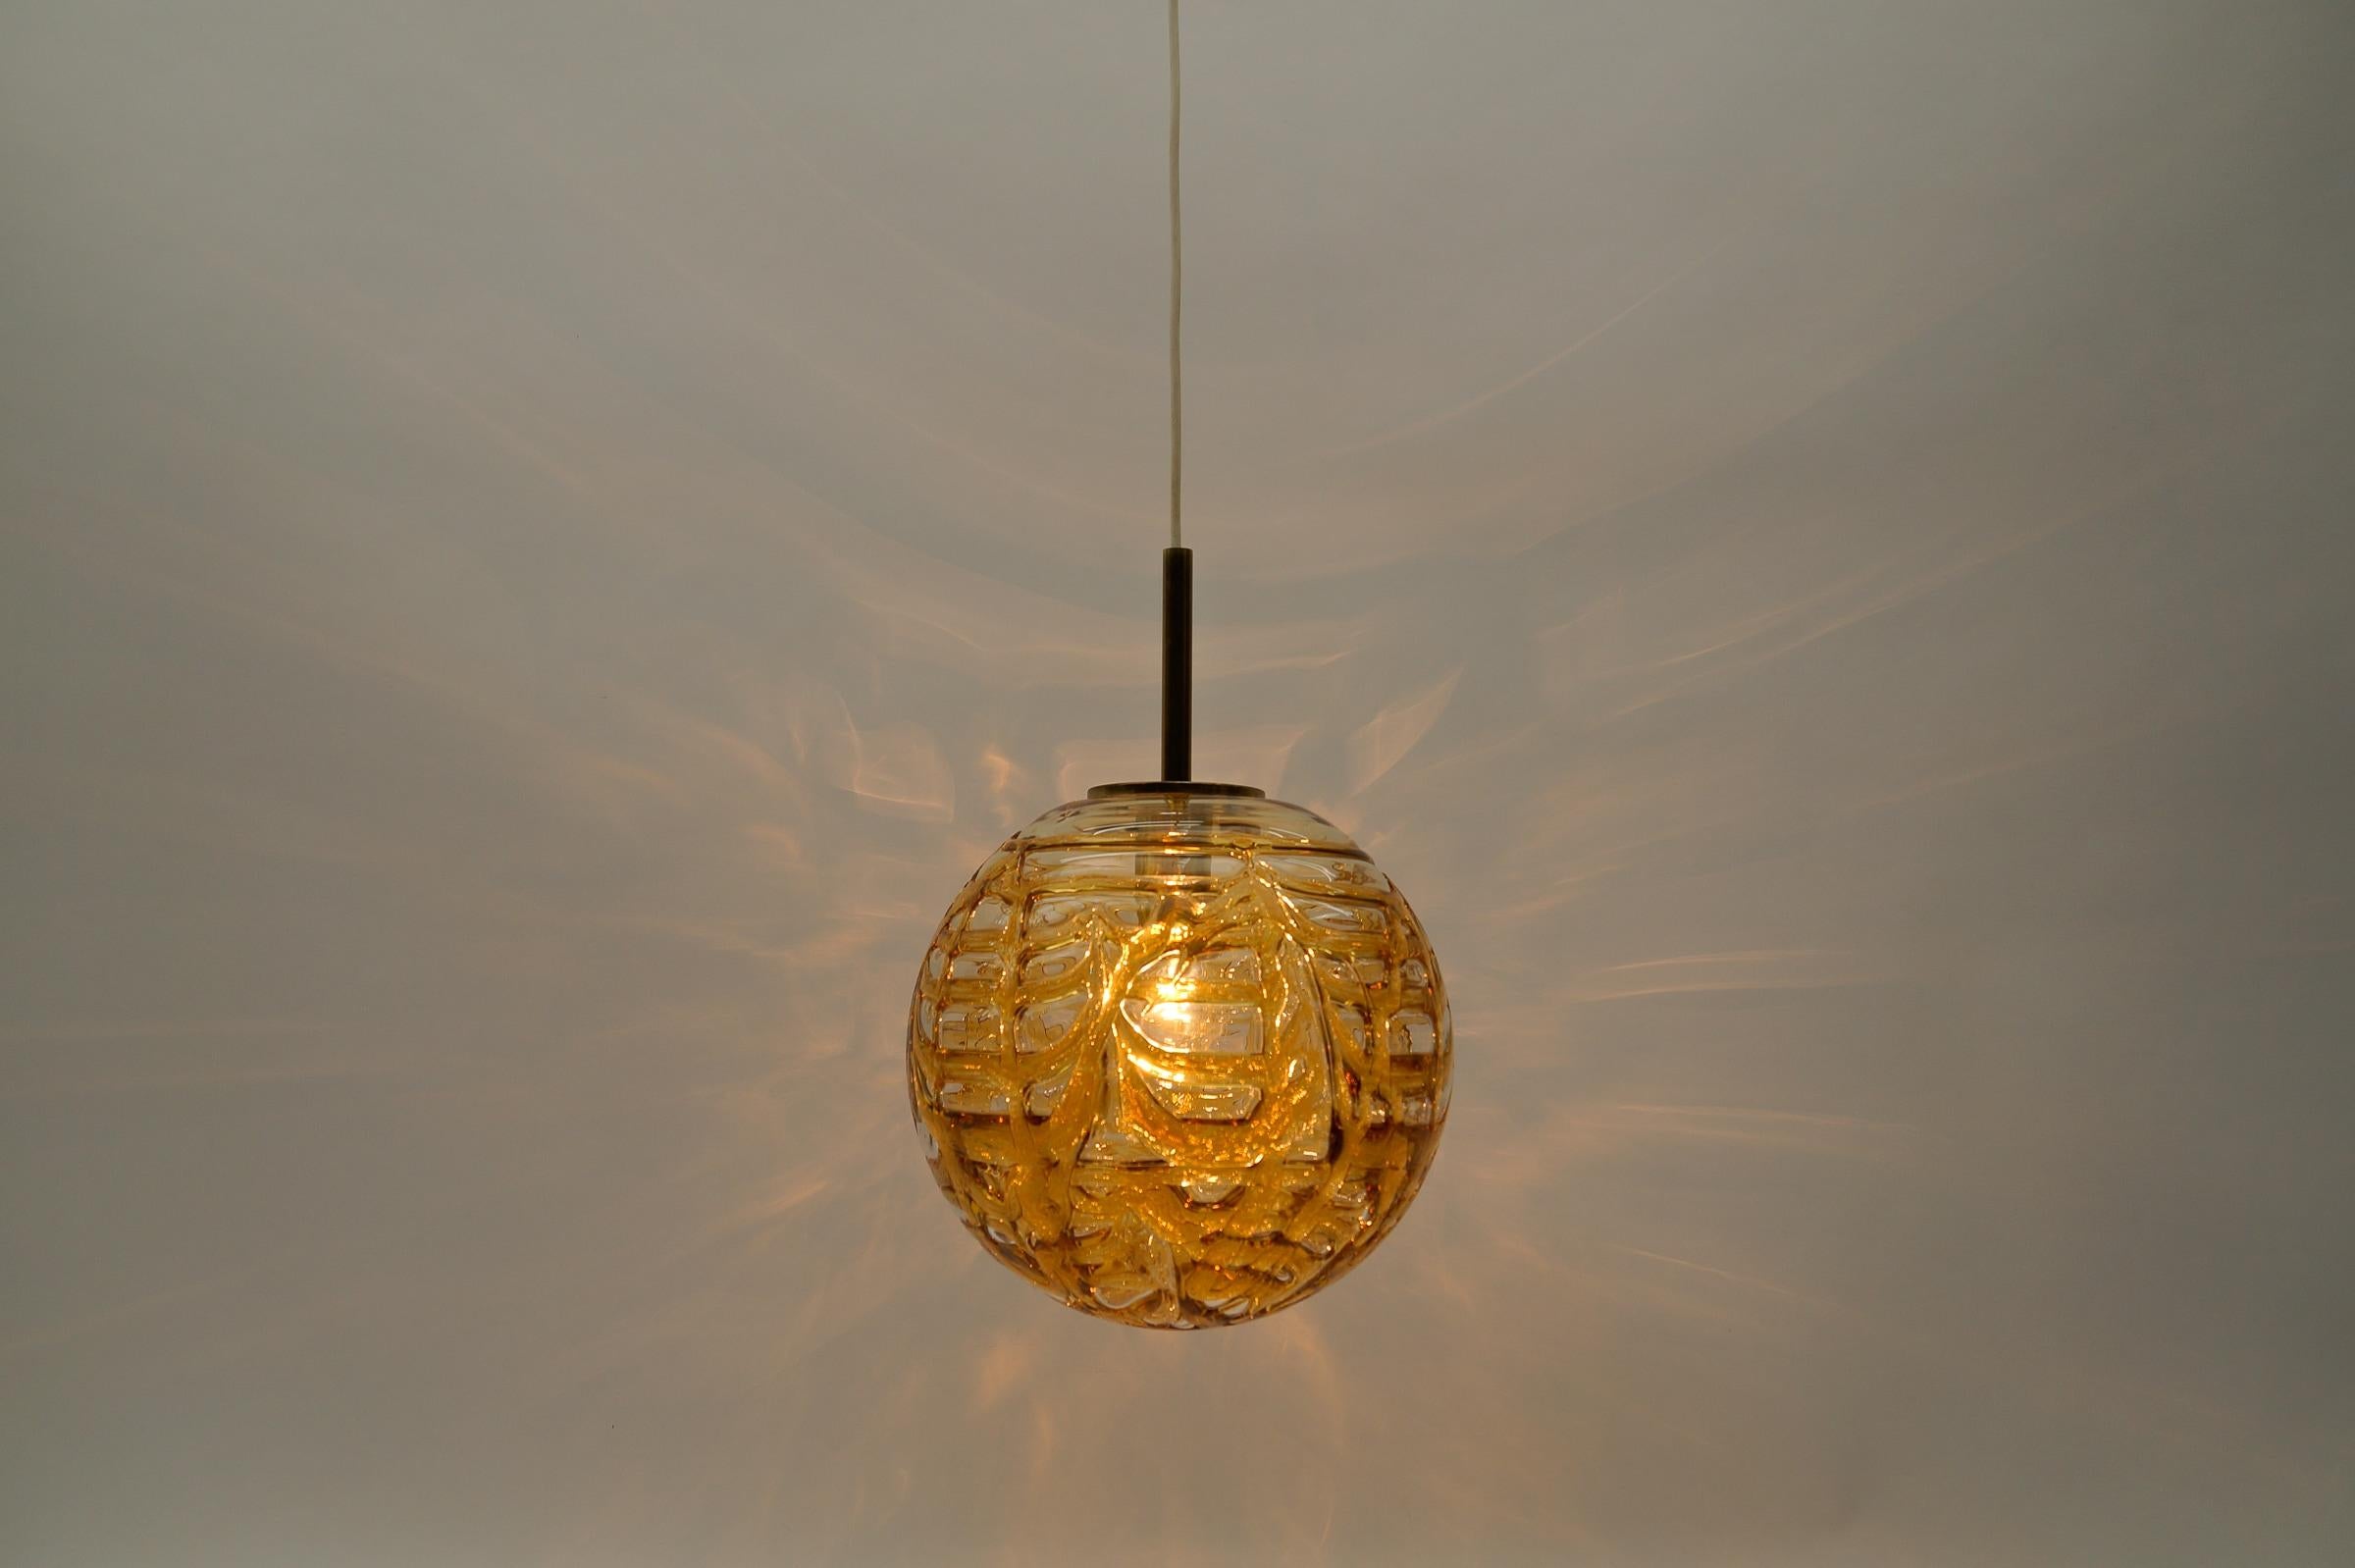 Mid-Century Modern Yellow Murano Glass Ball Pendant Lamp by Doria, - 1960s Germany For Sale